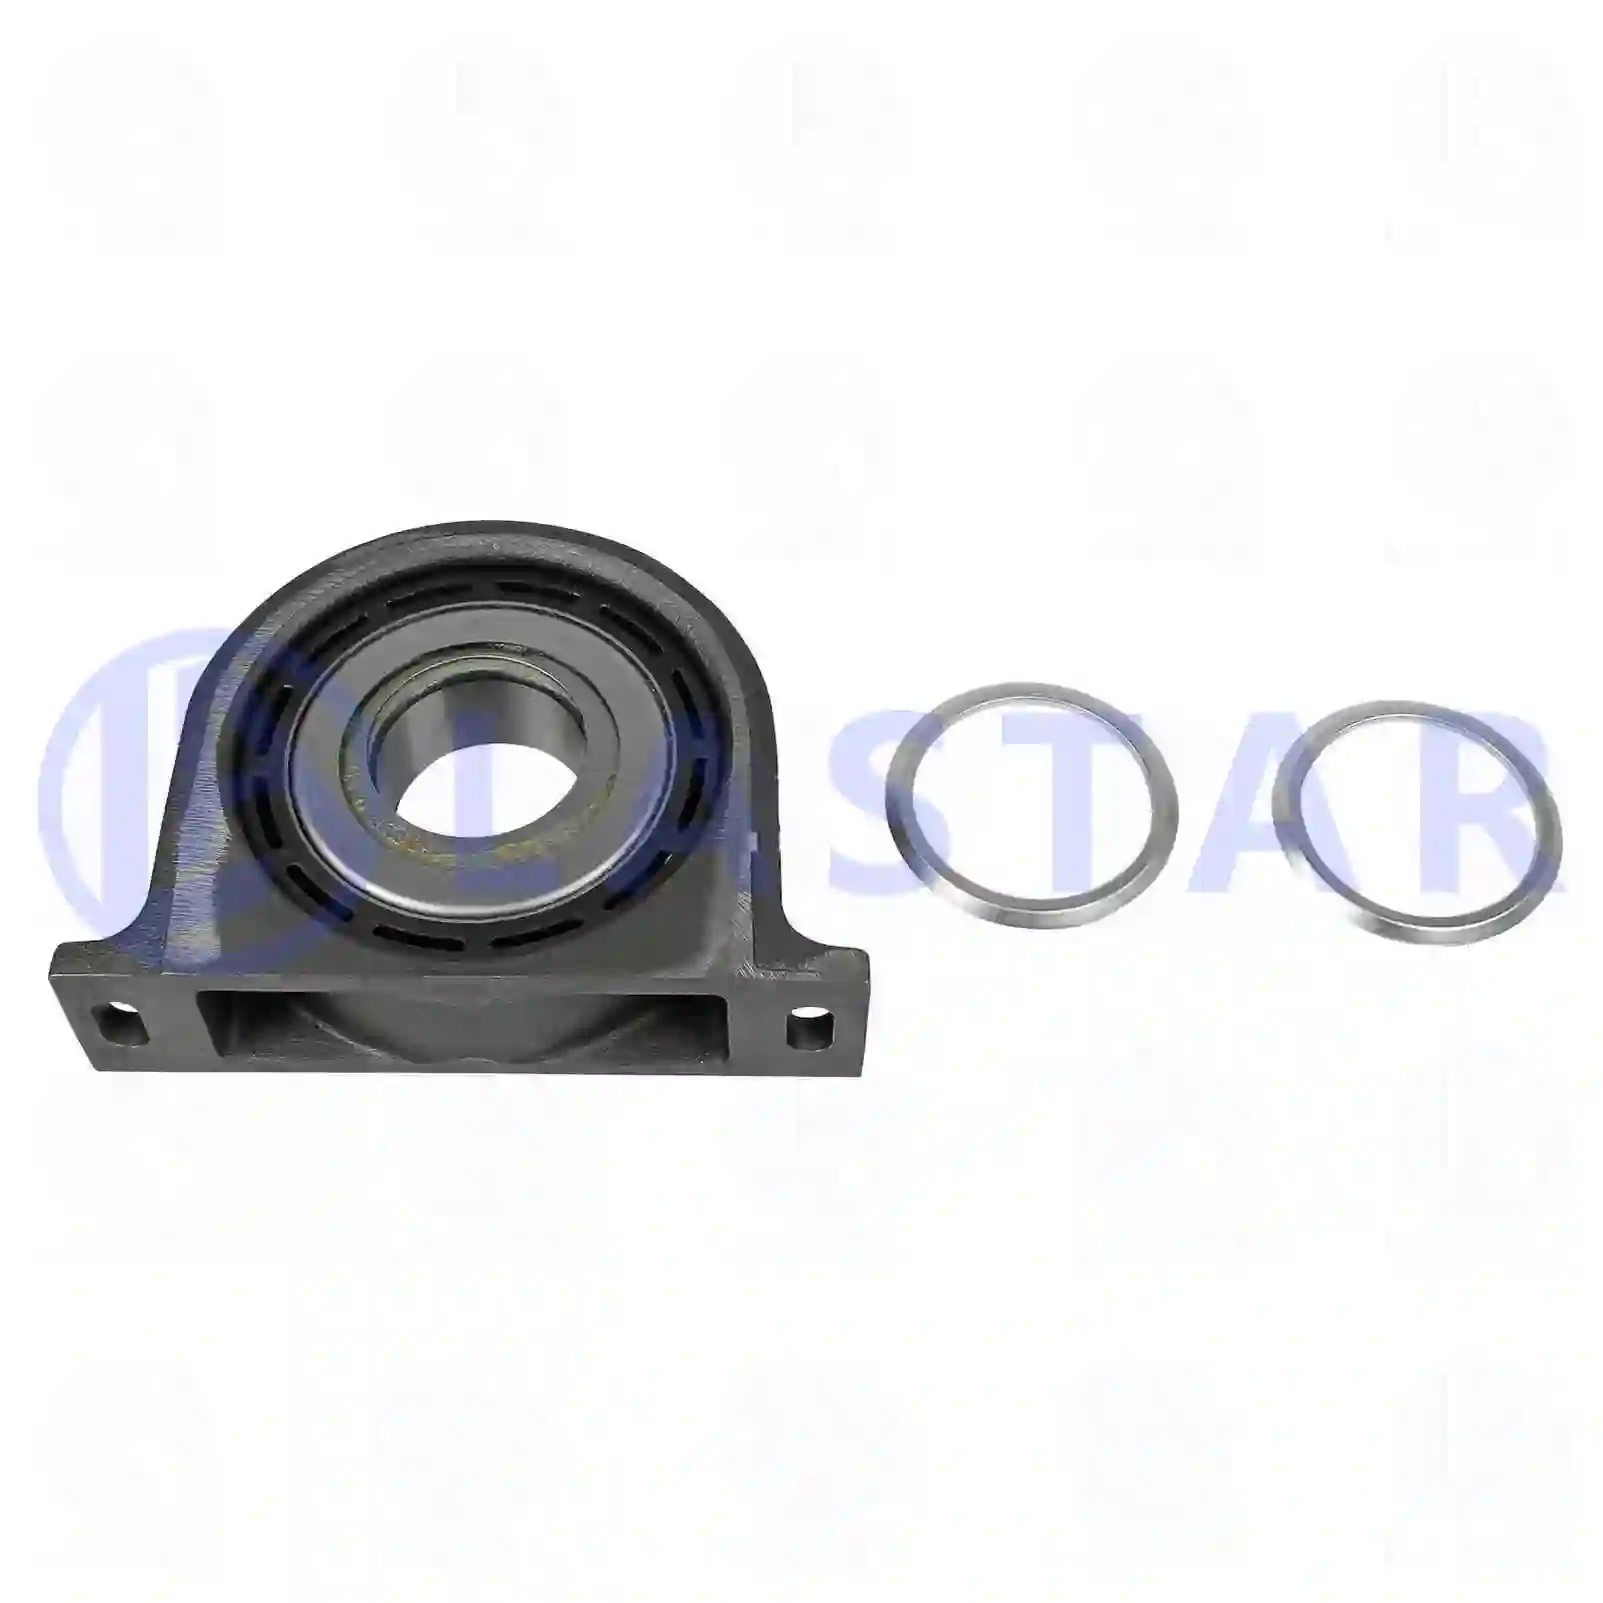 Support Bearing Center bearing, la no: 77734287 ,  oem no:1288242 Lastar Spare Part | Truck Spare Parts, Auotomotive Spare Parts